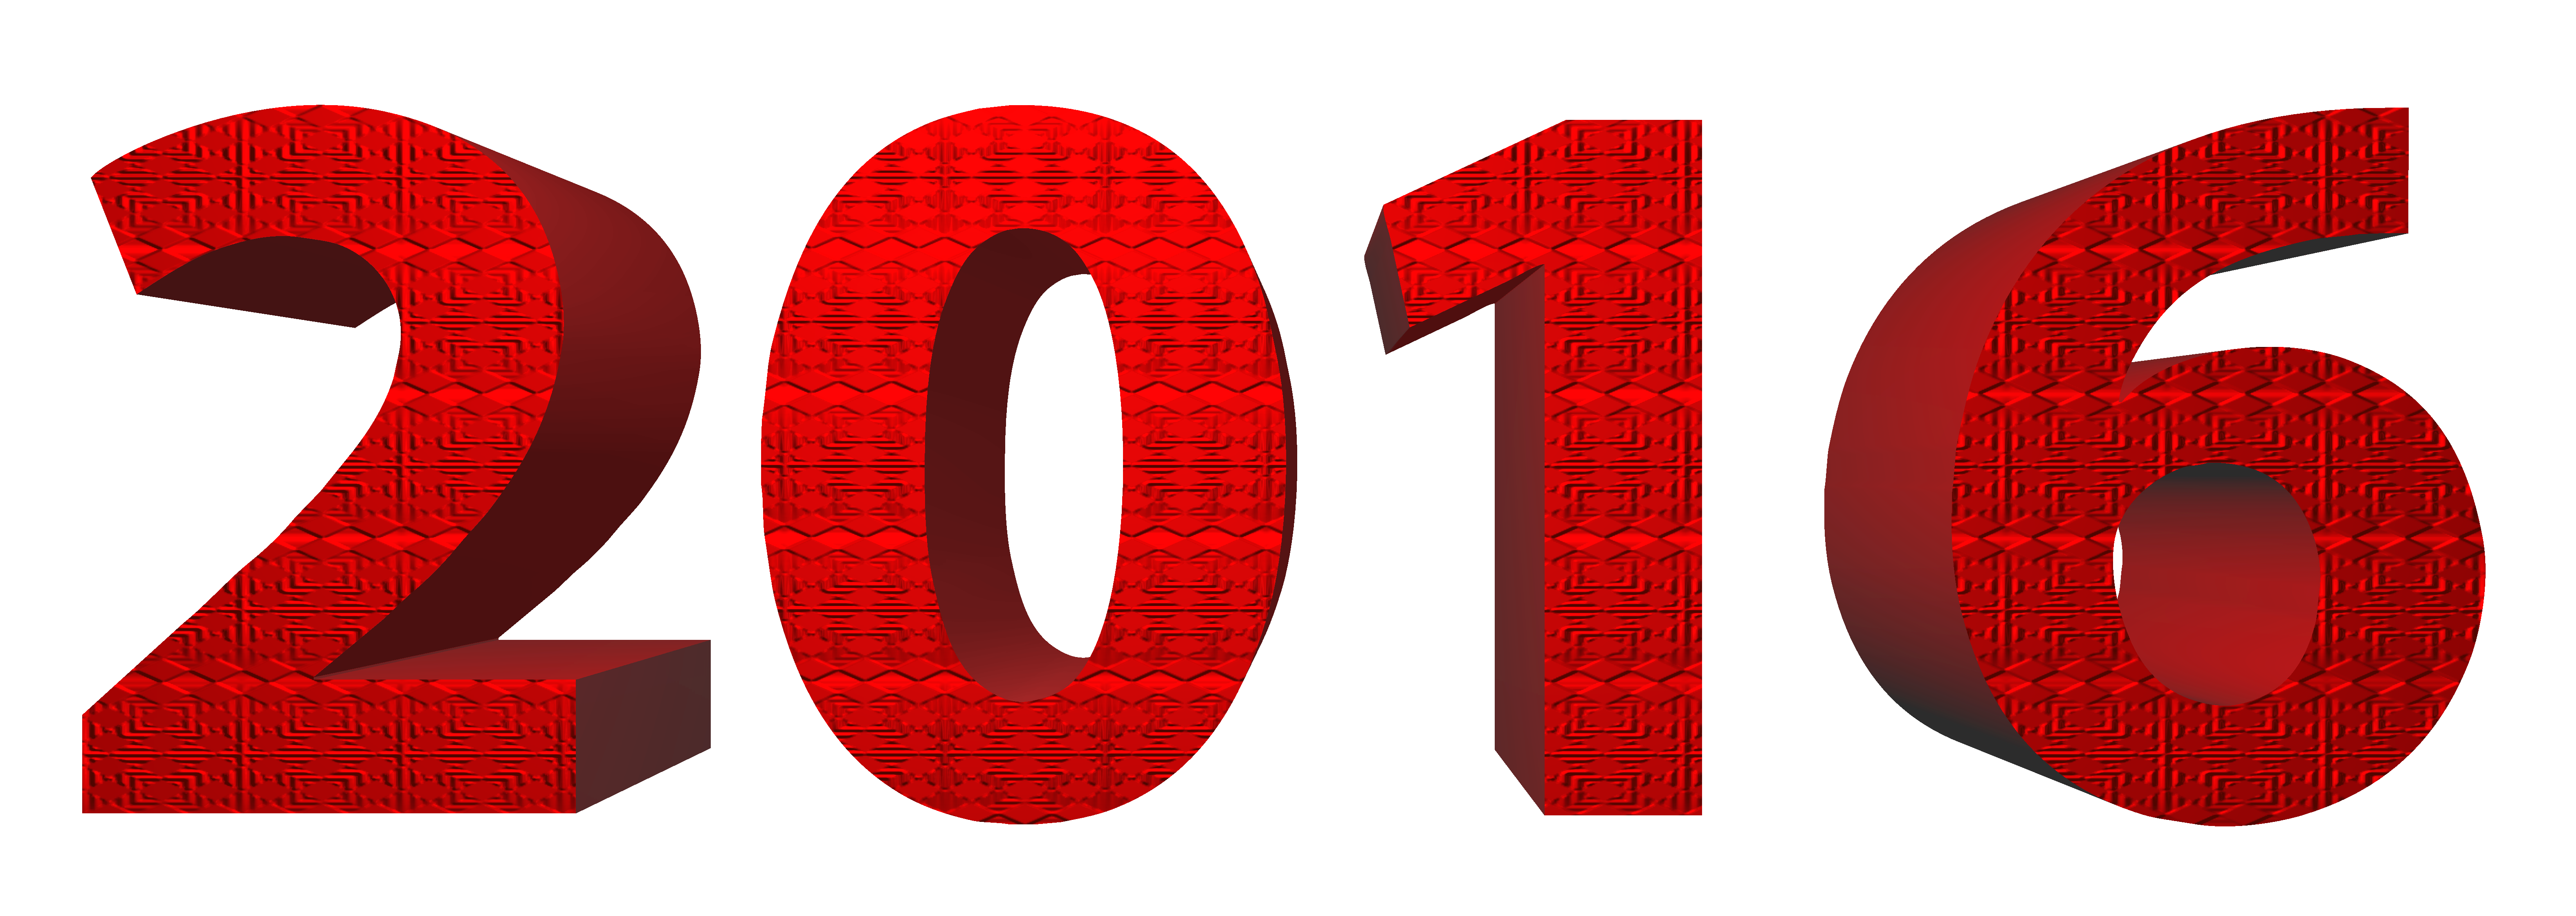 2016 clipart red.  d png image